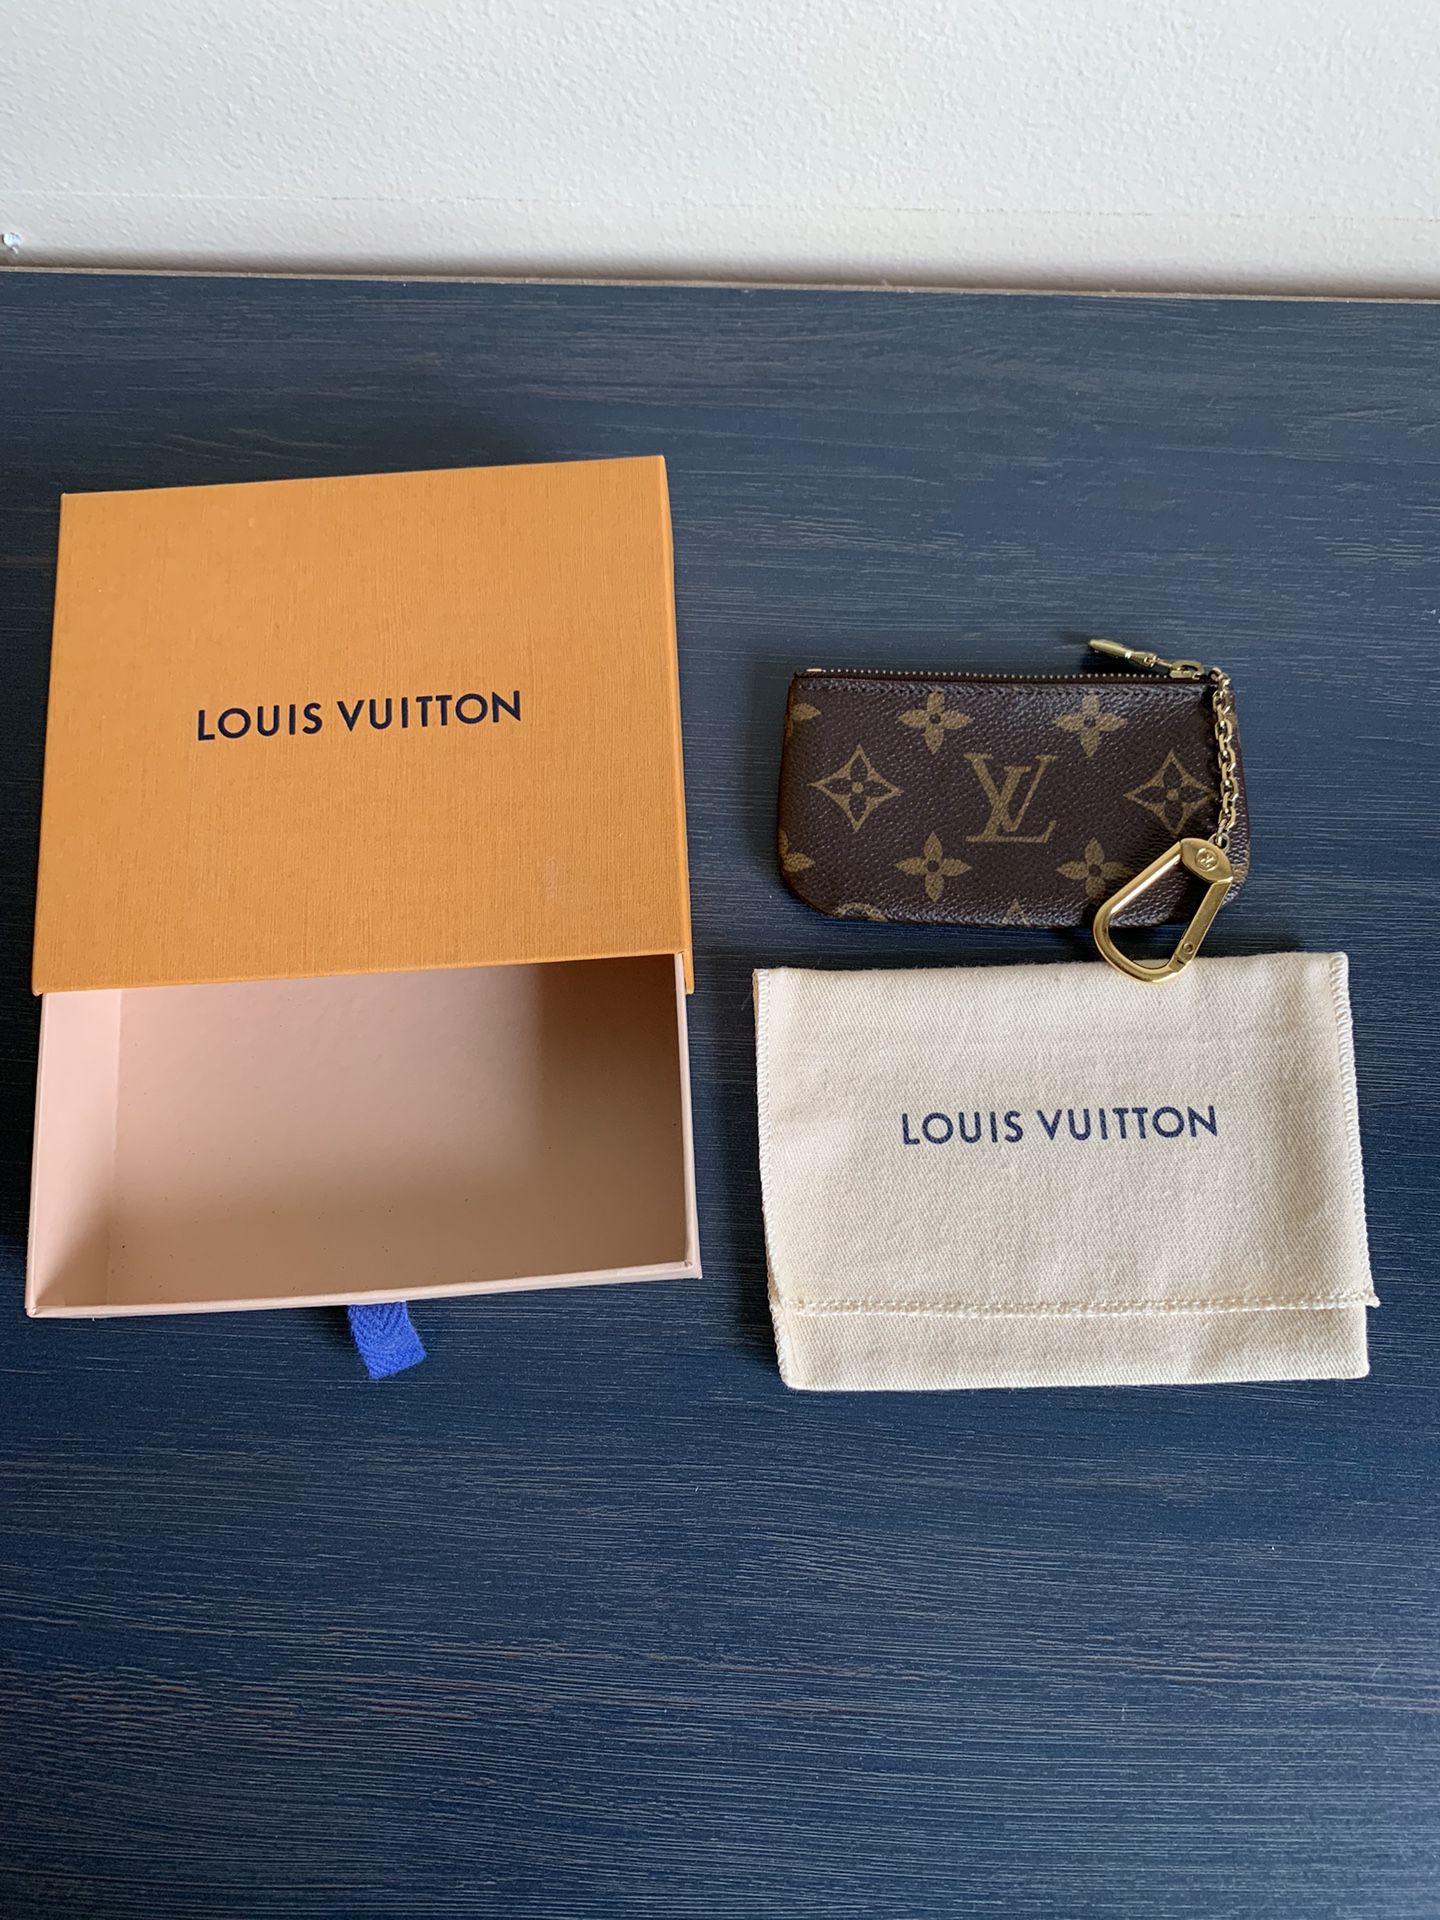 Louis Vuitton Card And Key Pouch for Sale in Brea, CA - OfferUp